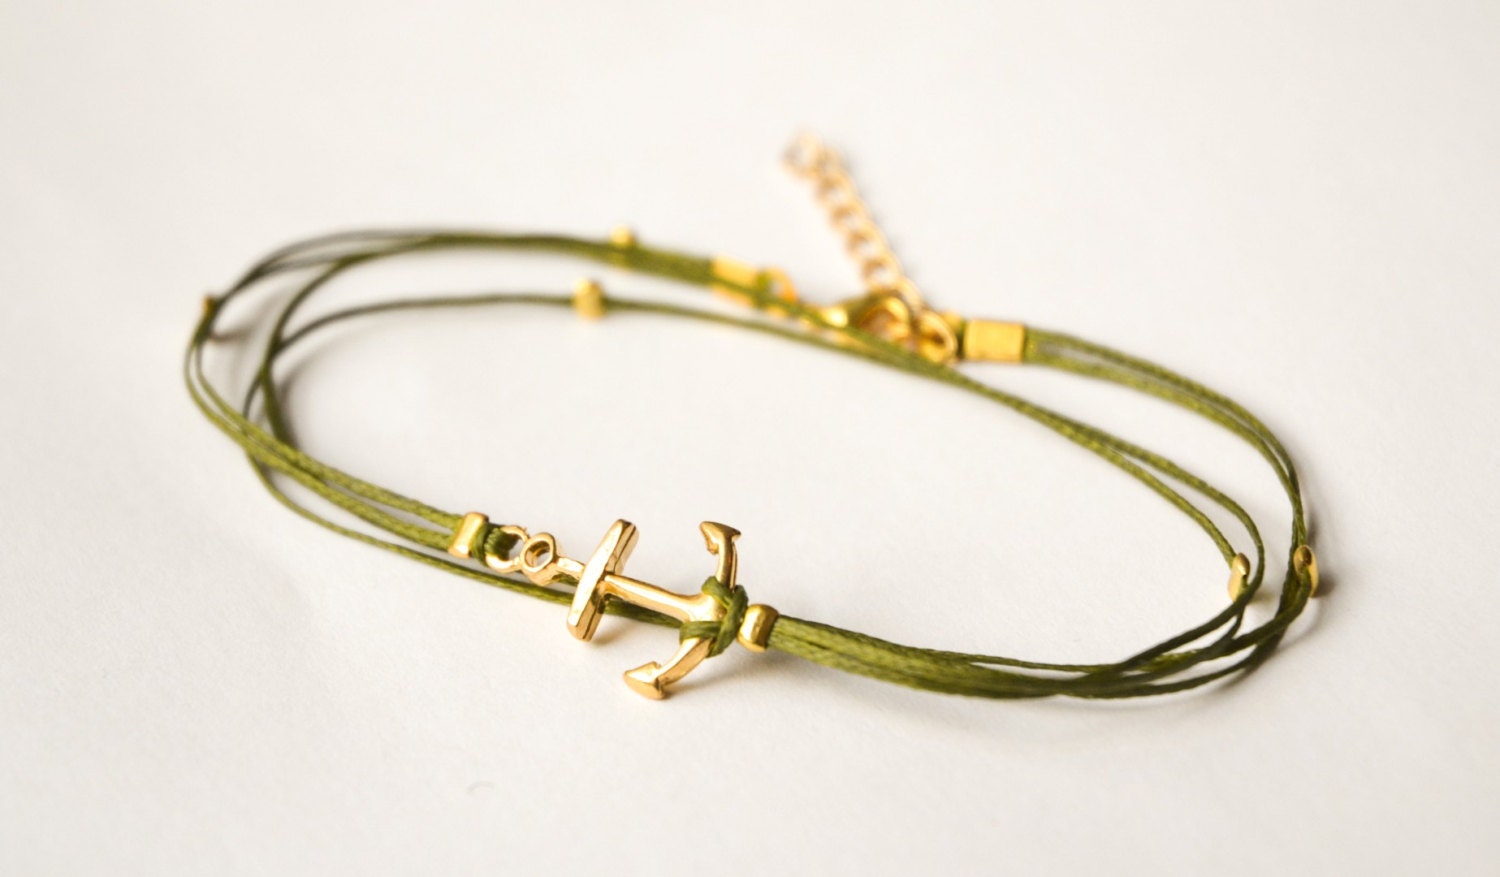 Anchor Anklet Green Dainty Anklet With a Gold Anchor Charm - Etsy